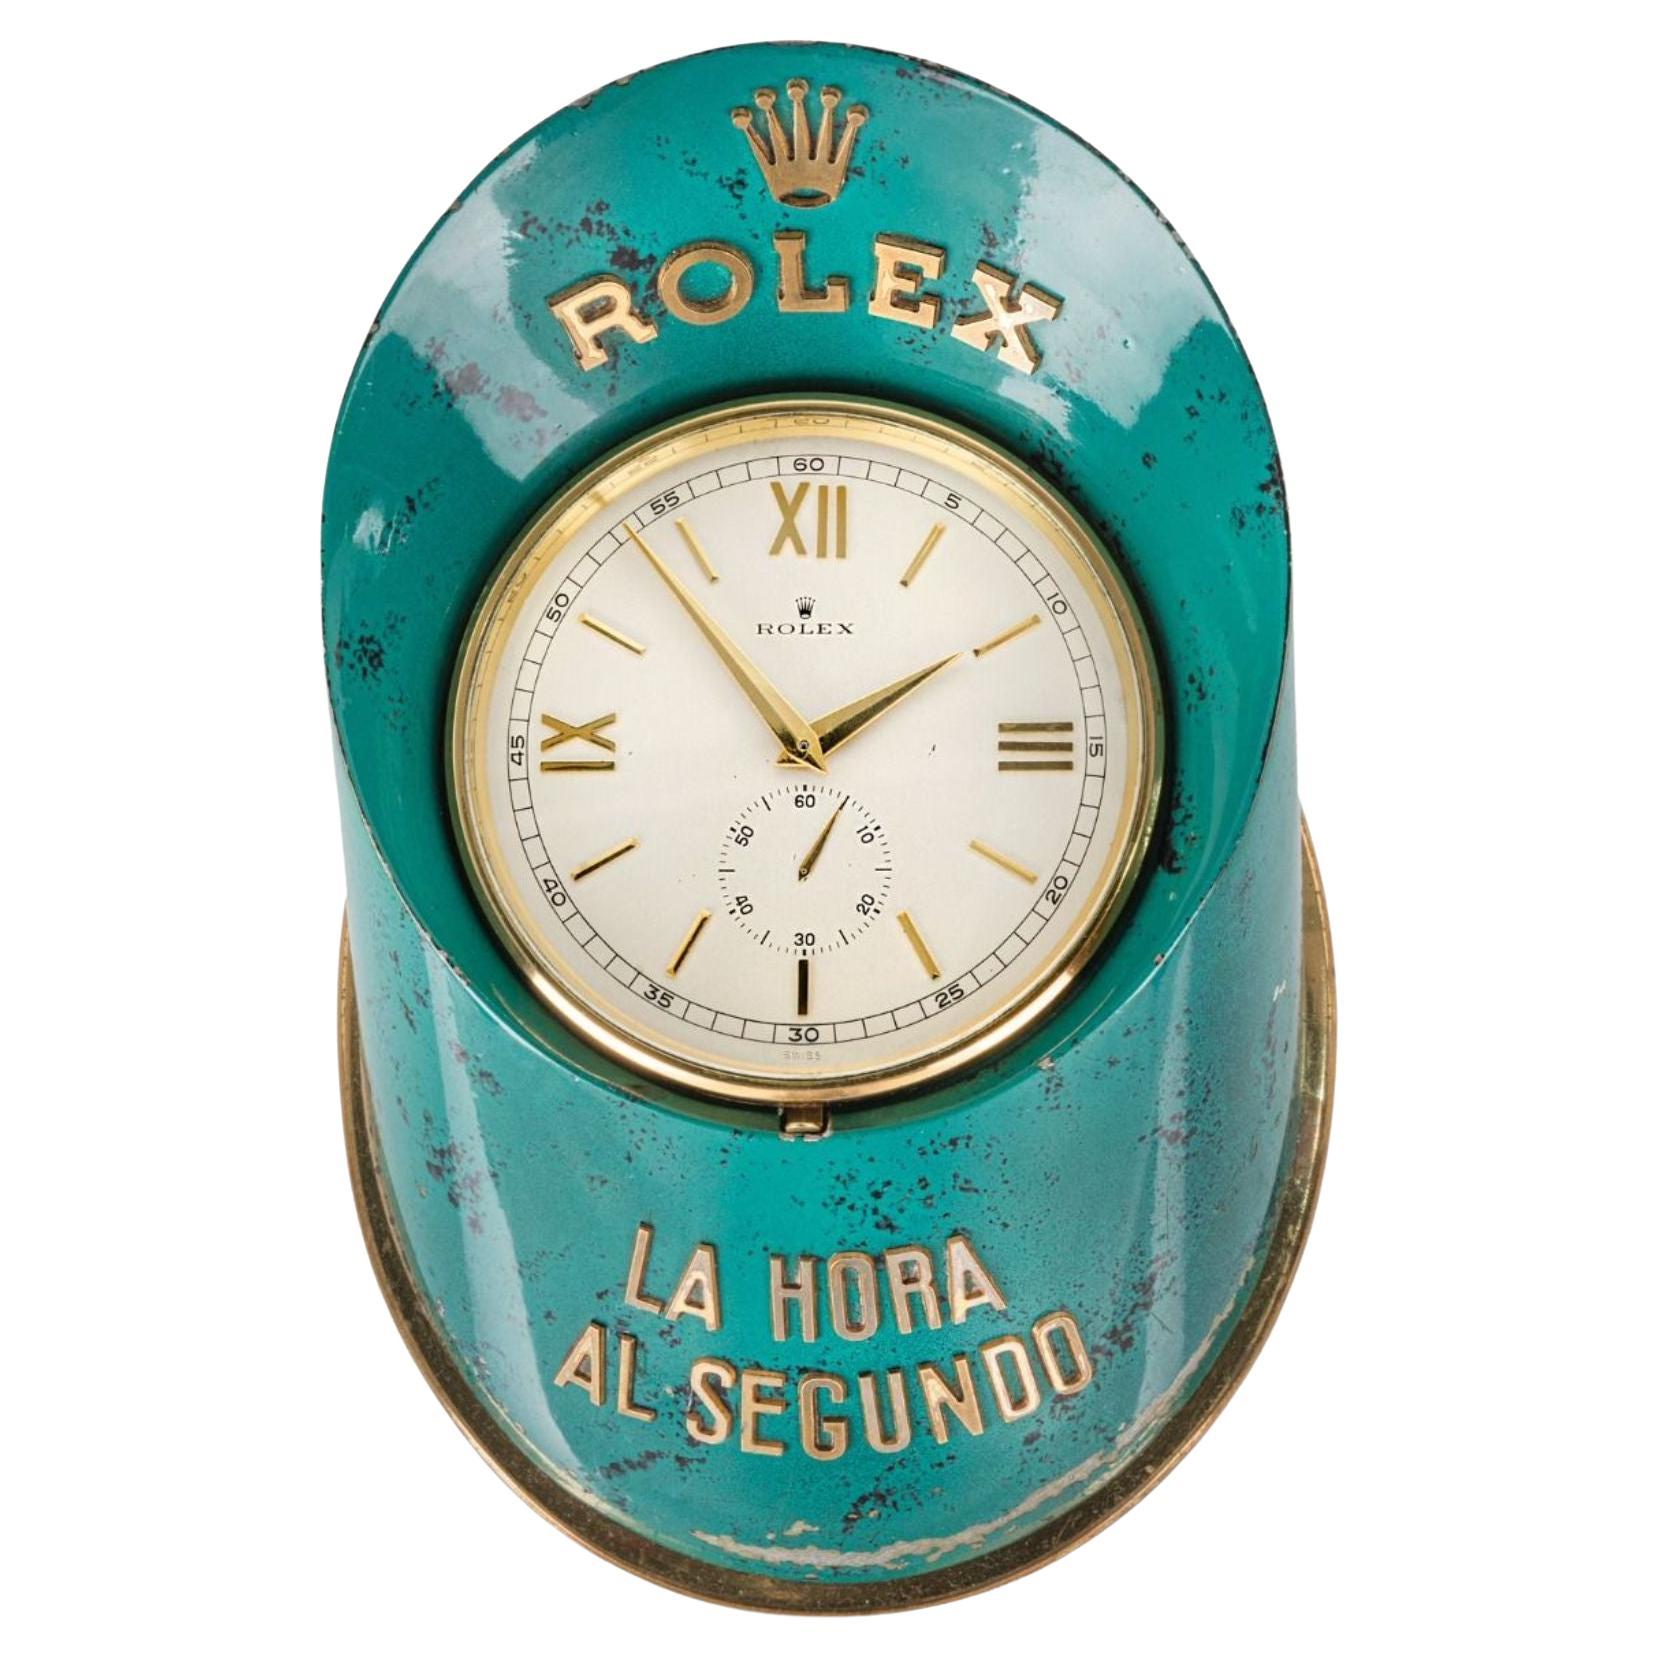 Rolex Clock - 1,016 For Sale on 1stDibs | rolex wall clock, rolex desk clock,  rolex clock price